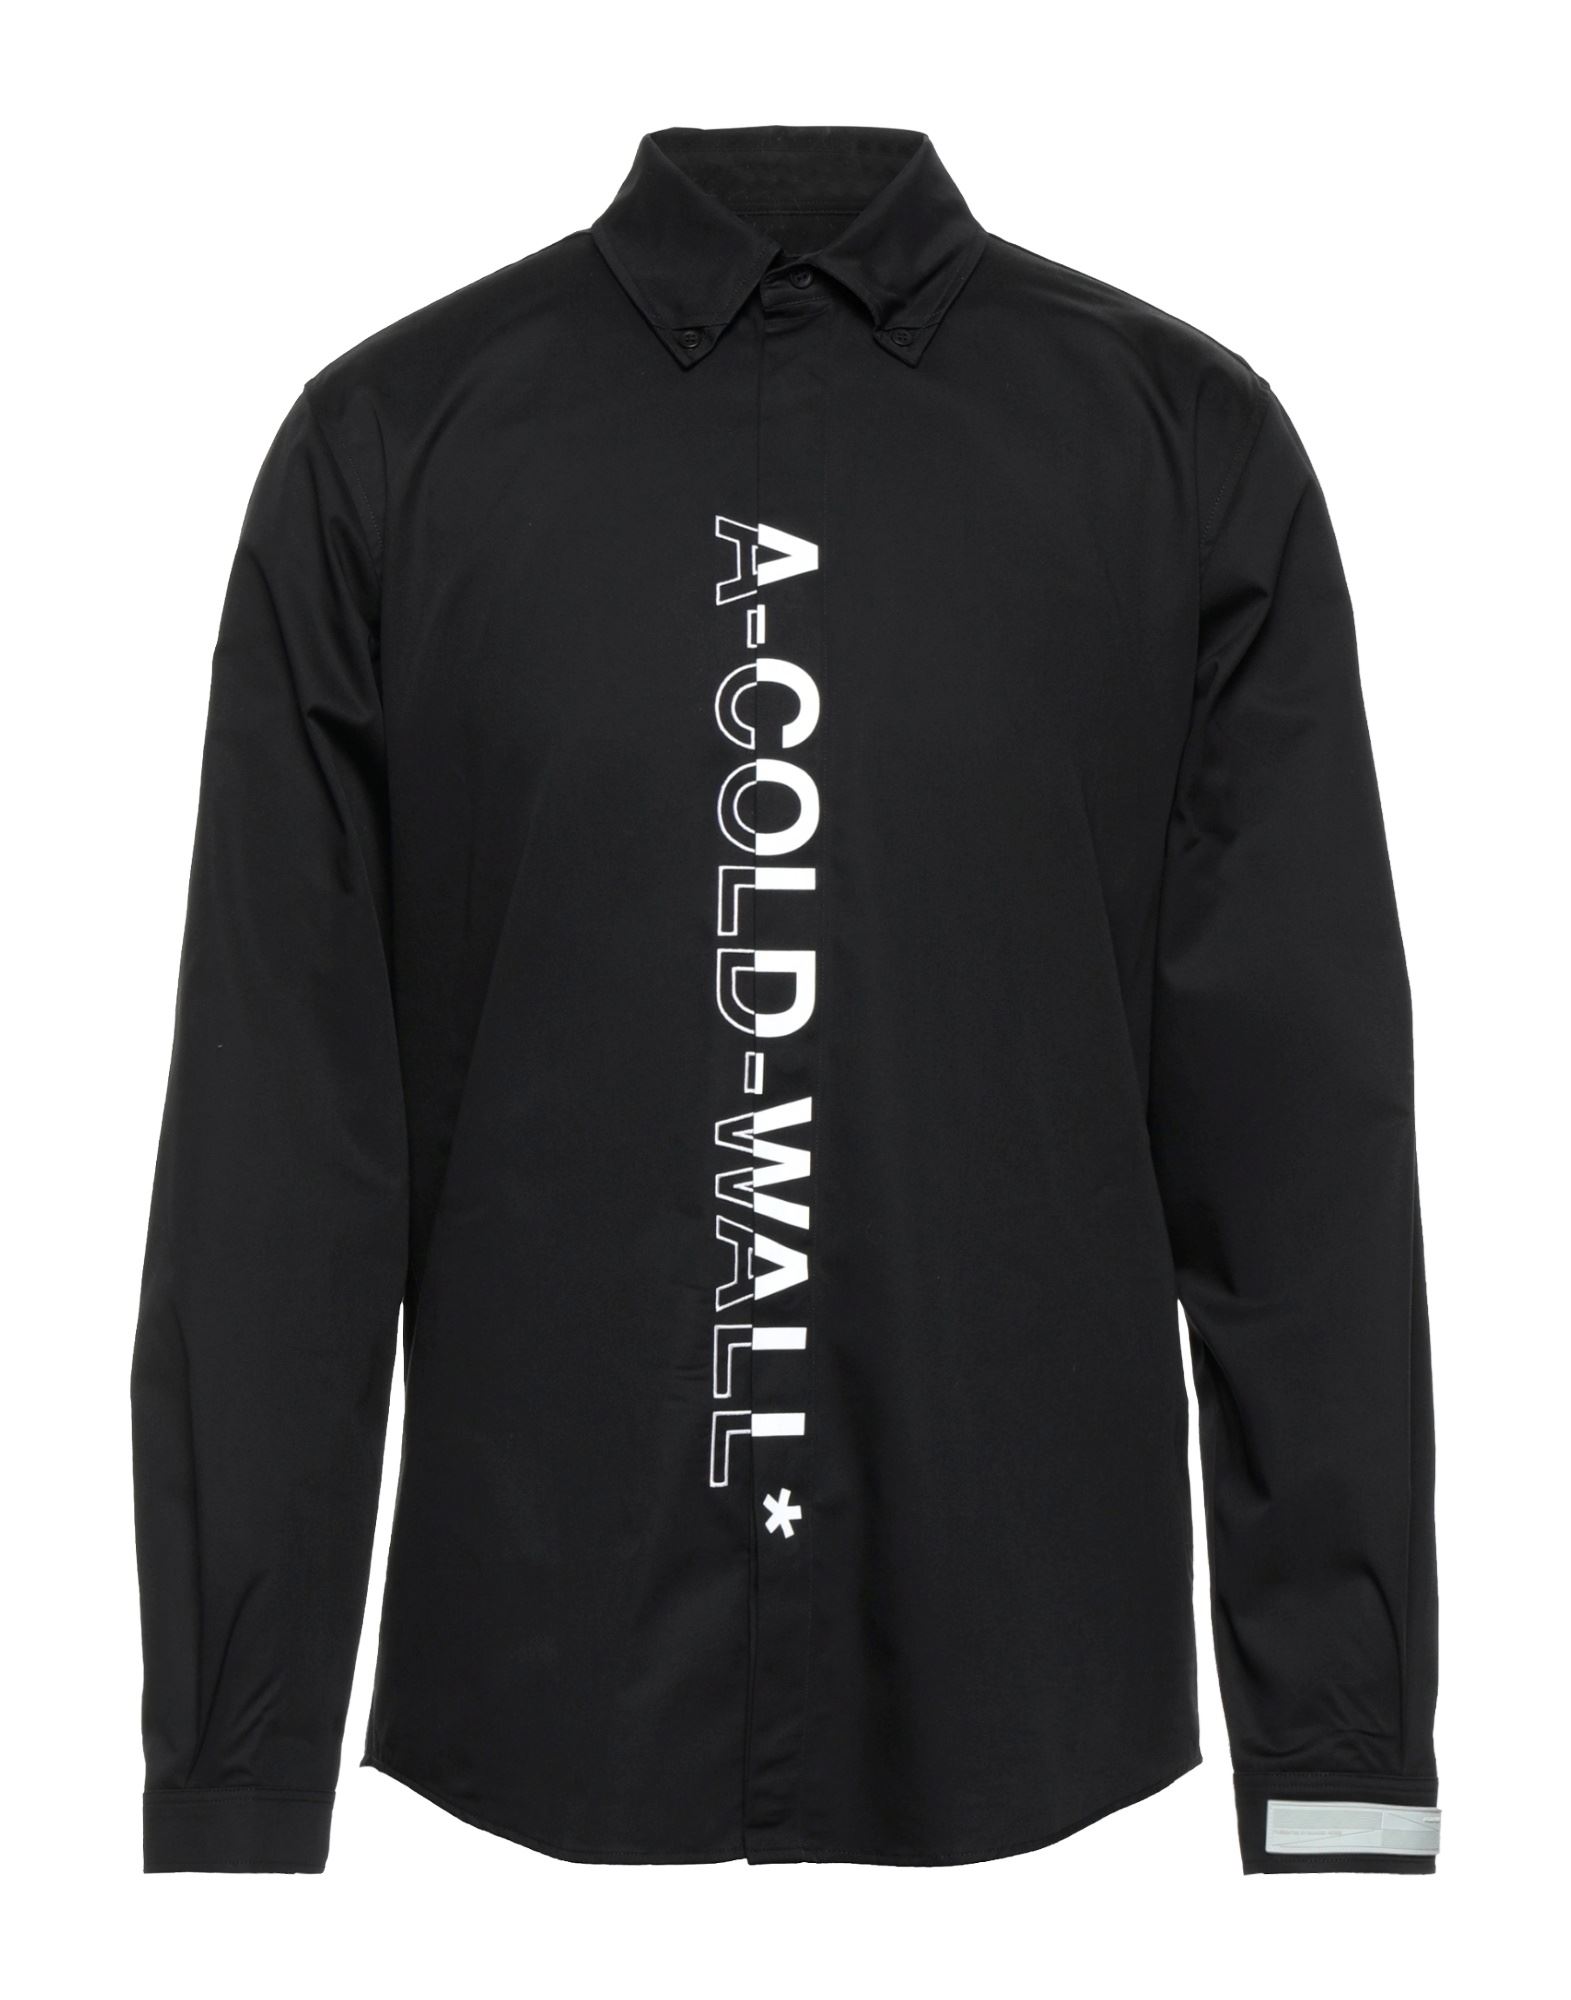 A-COLD-WALL* Shirts for Men | ModeSens